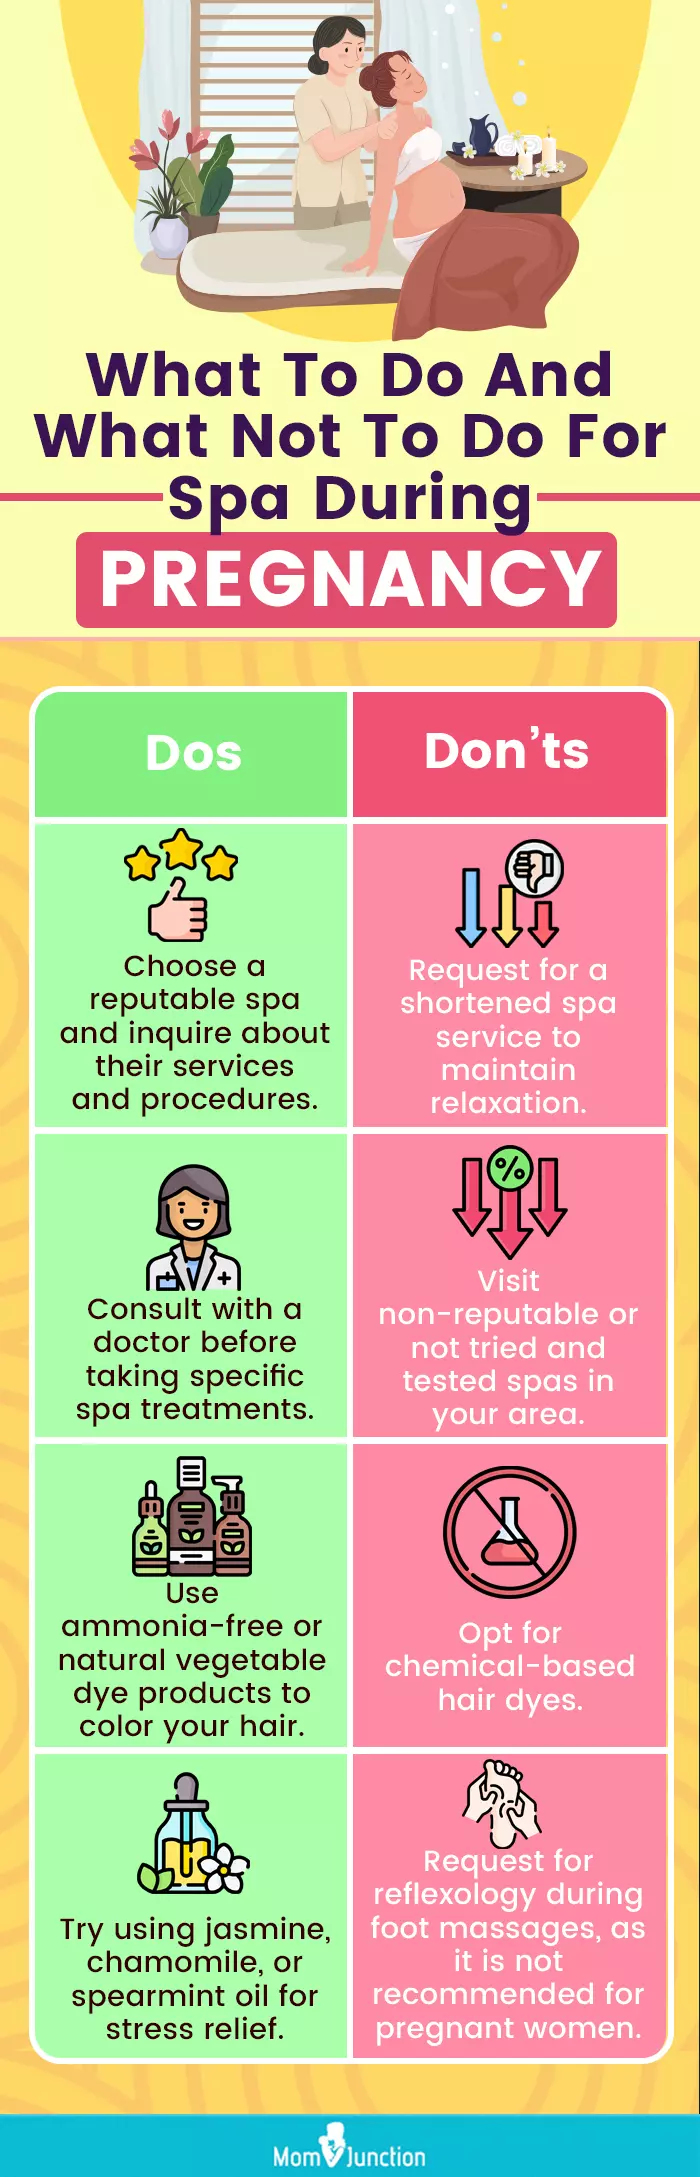 what to do and what not to do for spa during pregnancy (infographic)